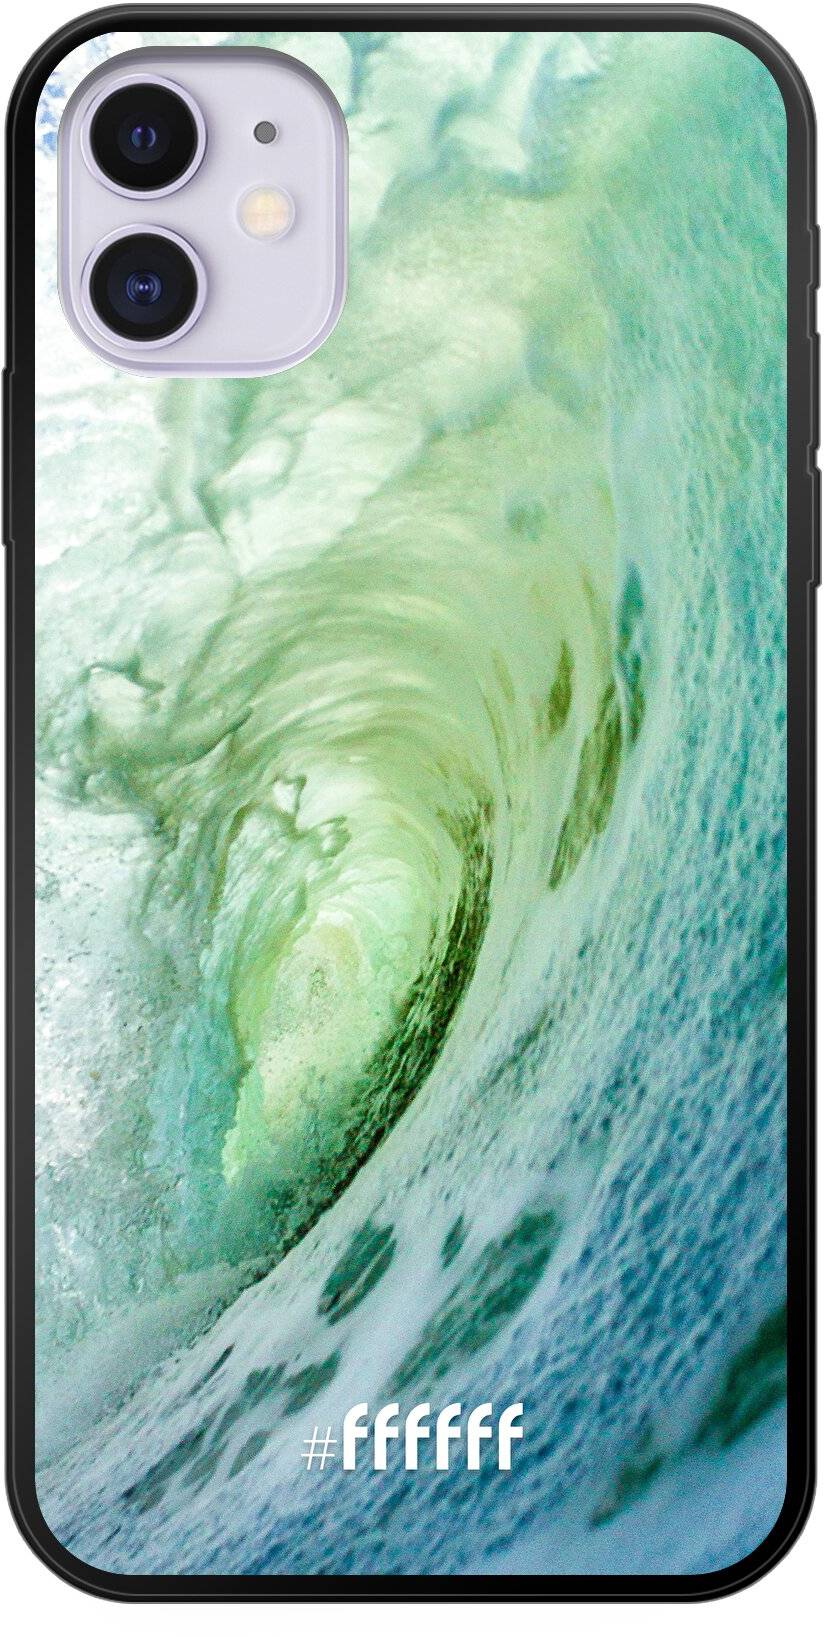 It's a Wave iPhone 11